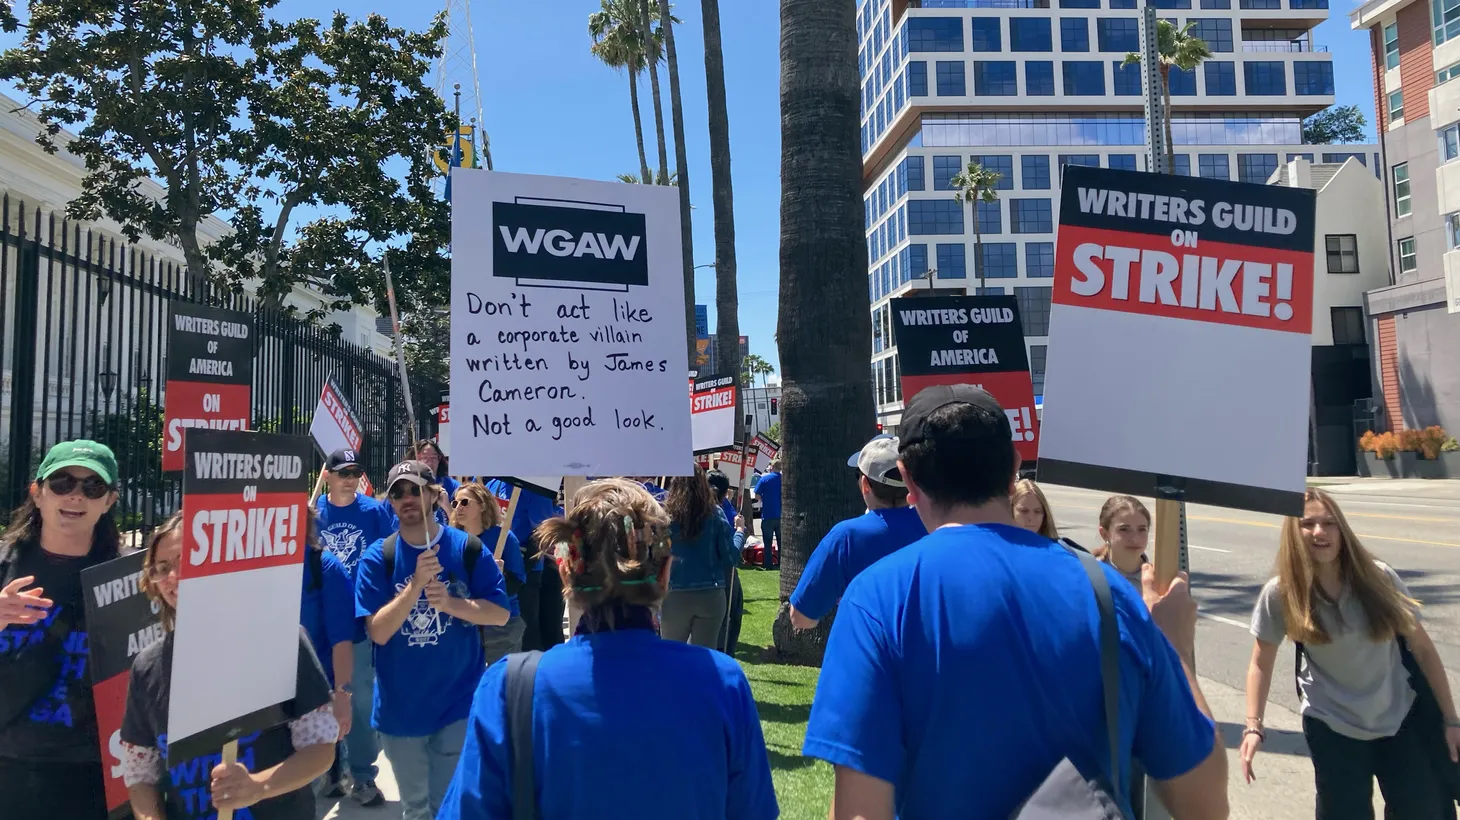 Hollywood writers carry signs during a strike. “Don’t act like a corporate villain written by James Cameron. Not a good look,” says one sign. May 2, 2023 in Los Angeles.